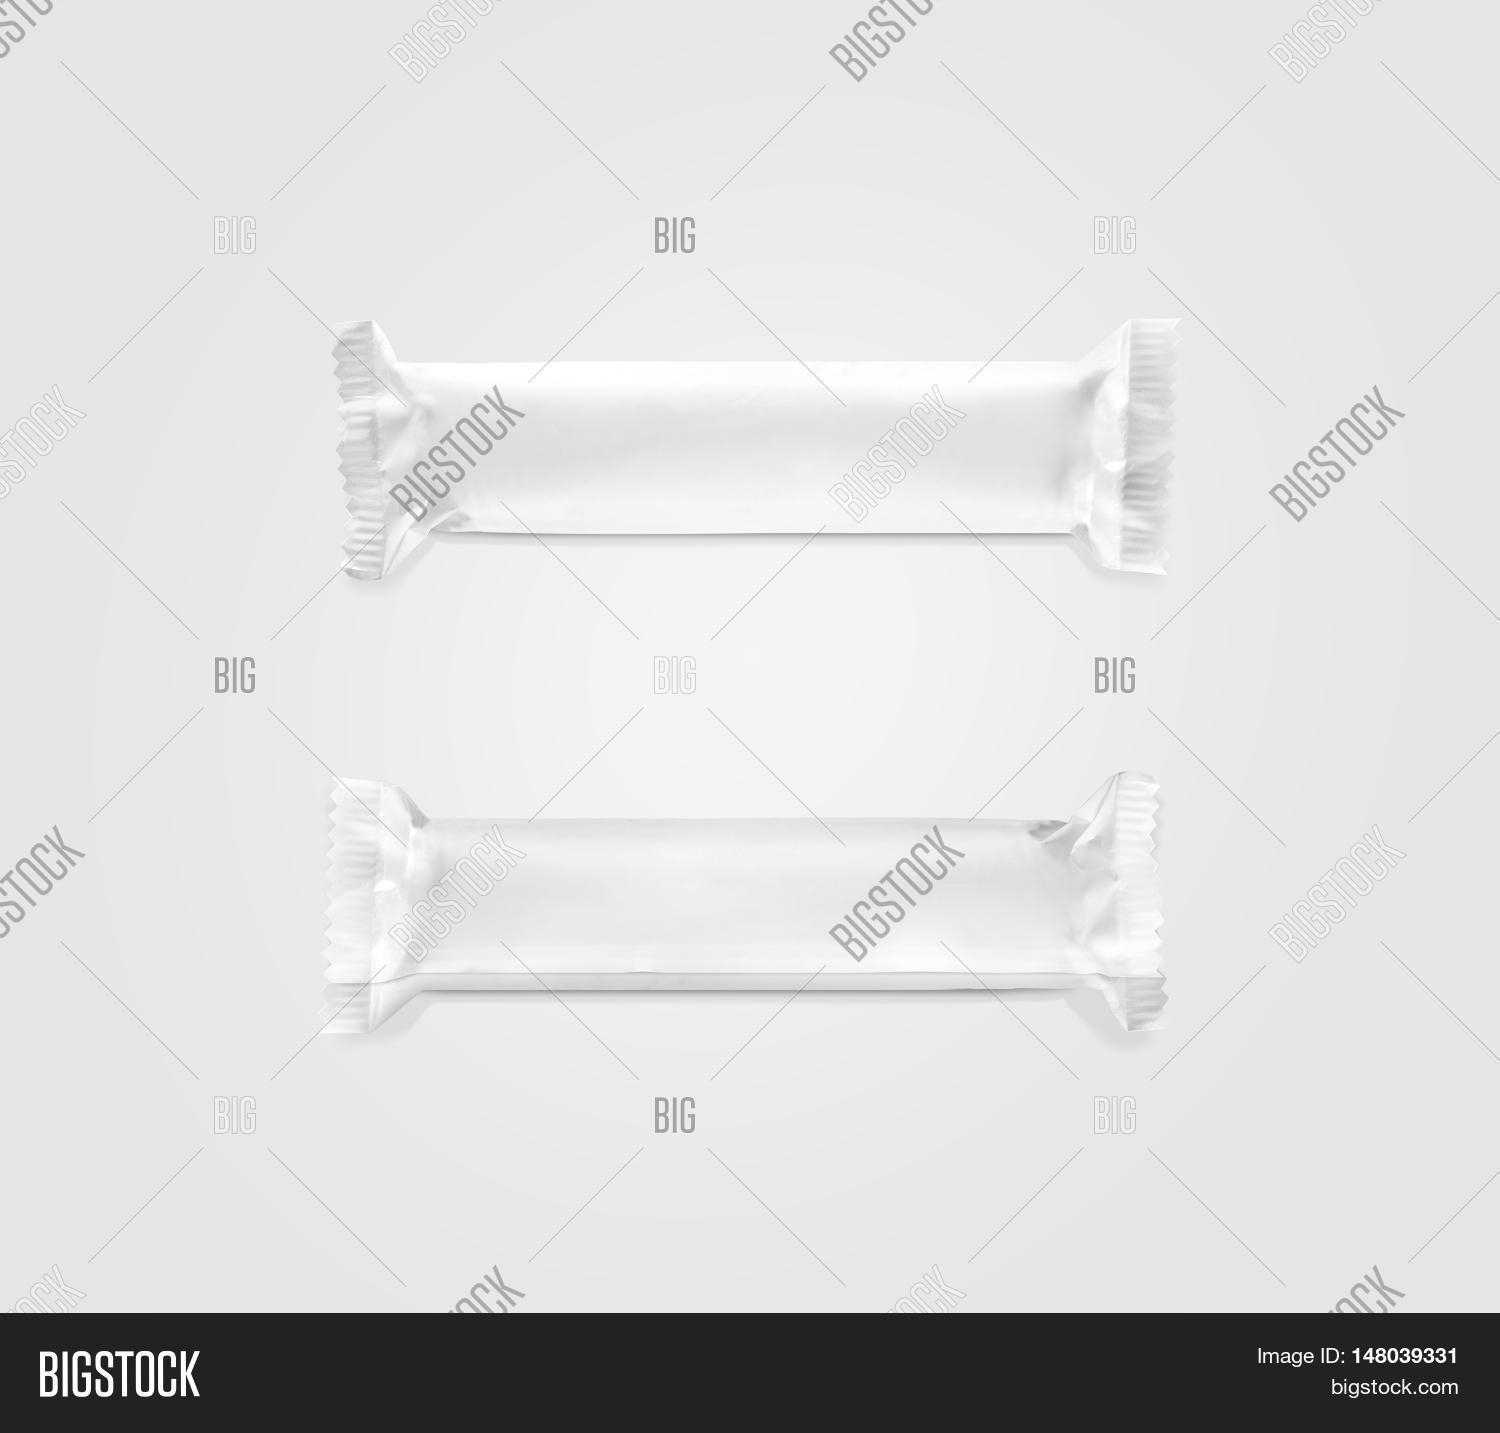 Blank White Candy Bar Image & Photo (Free Trial) | Bigstock Throughout Free Blank Candy Bar Wrapper Template